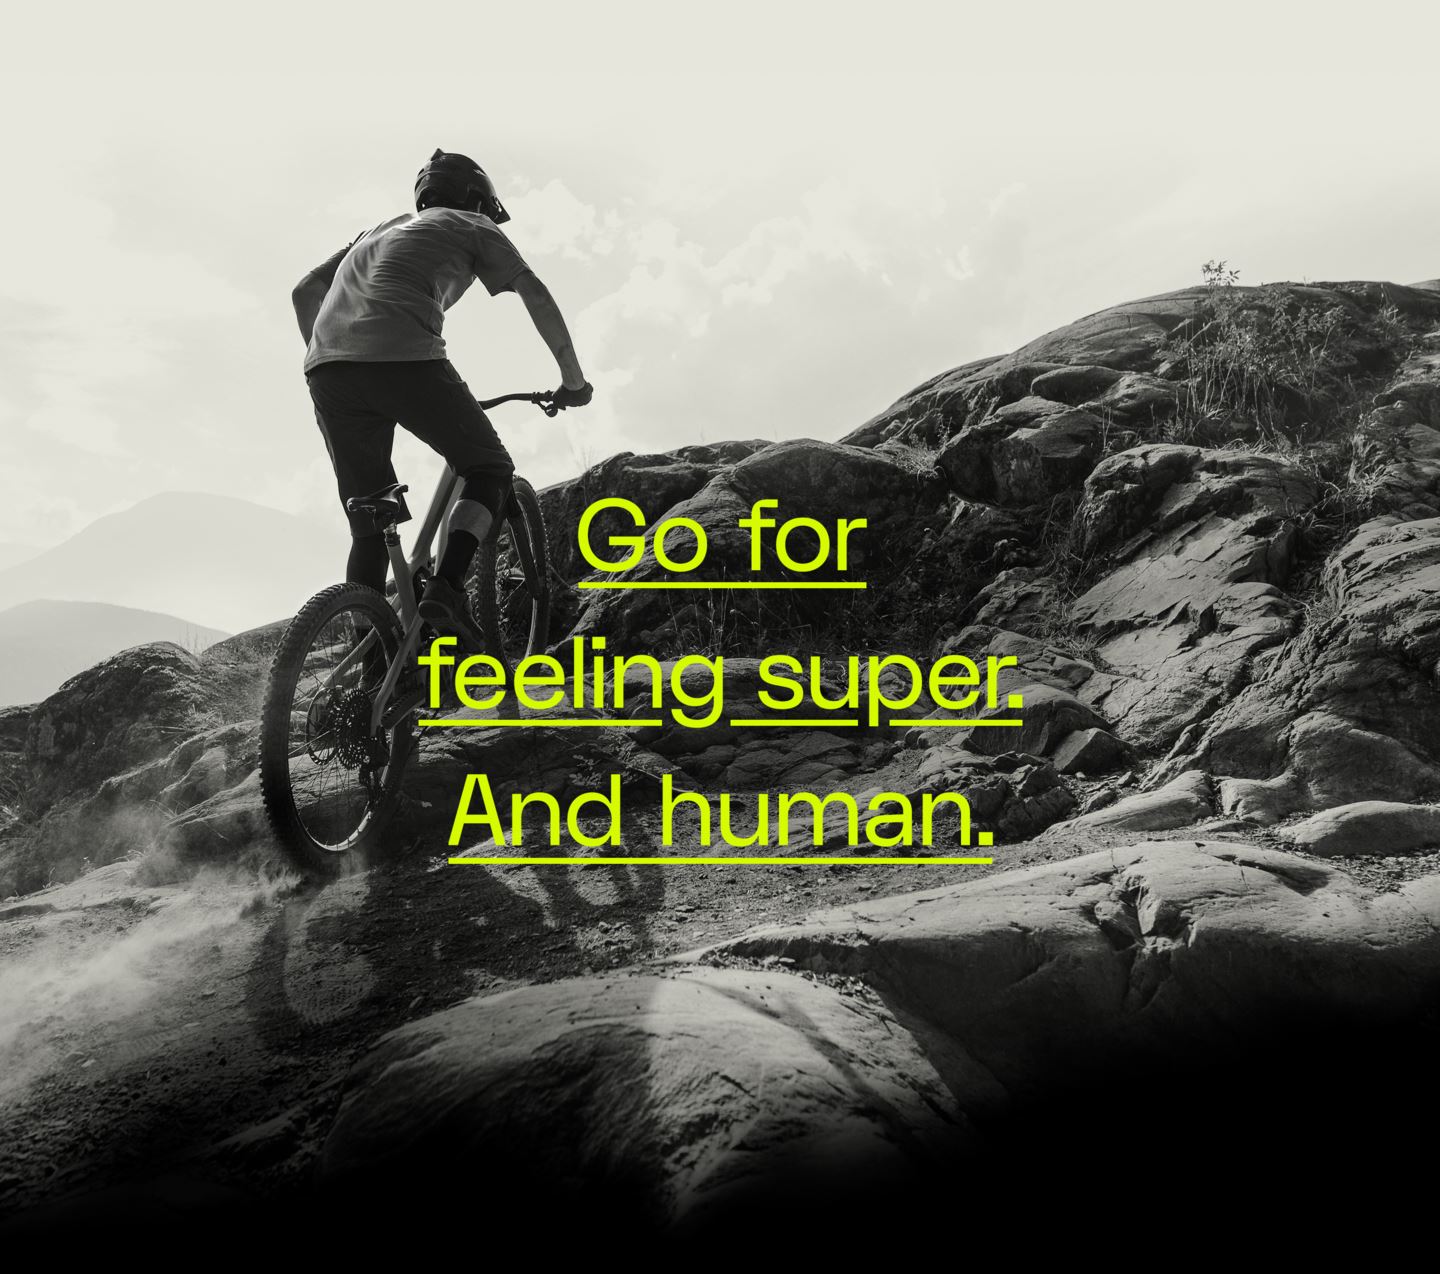 Go for feeling super. And human.